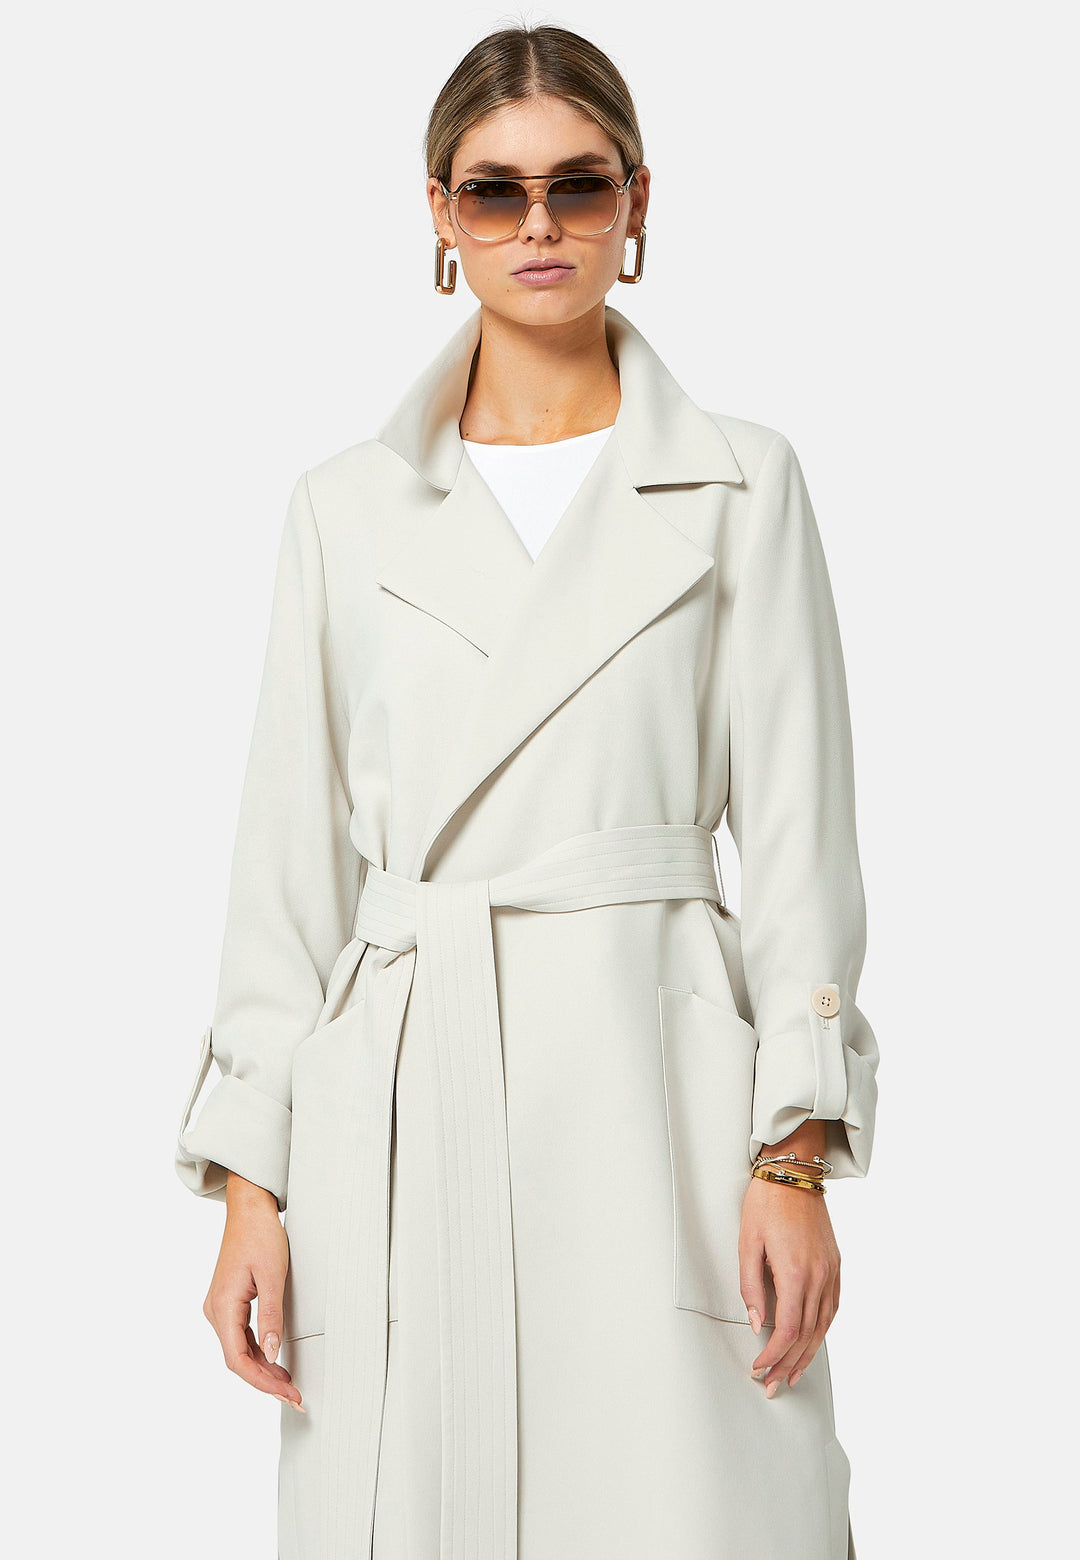 Lydiah, stone trench coat in a fluid satin back crepe. This coat features a relaxed, flowing silhouette, a self-tie belt, and front pockets. The design includes buttoned cuffs and a wide lapel. Pair with coordinating trouser for a chic monochromatic look.